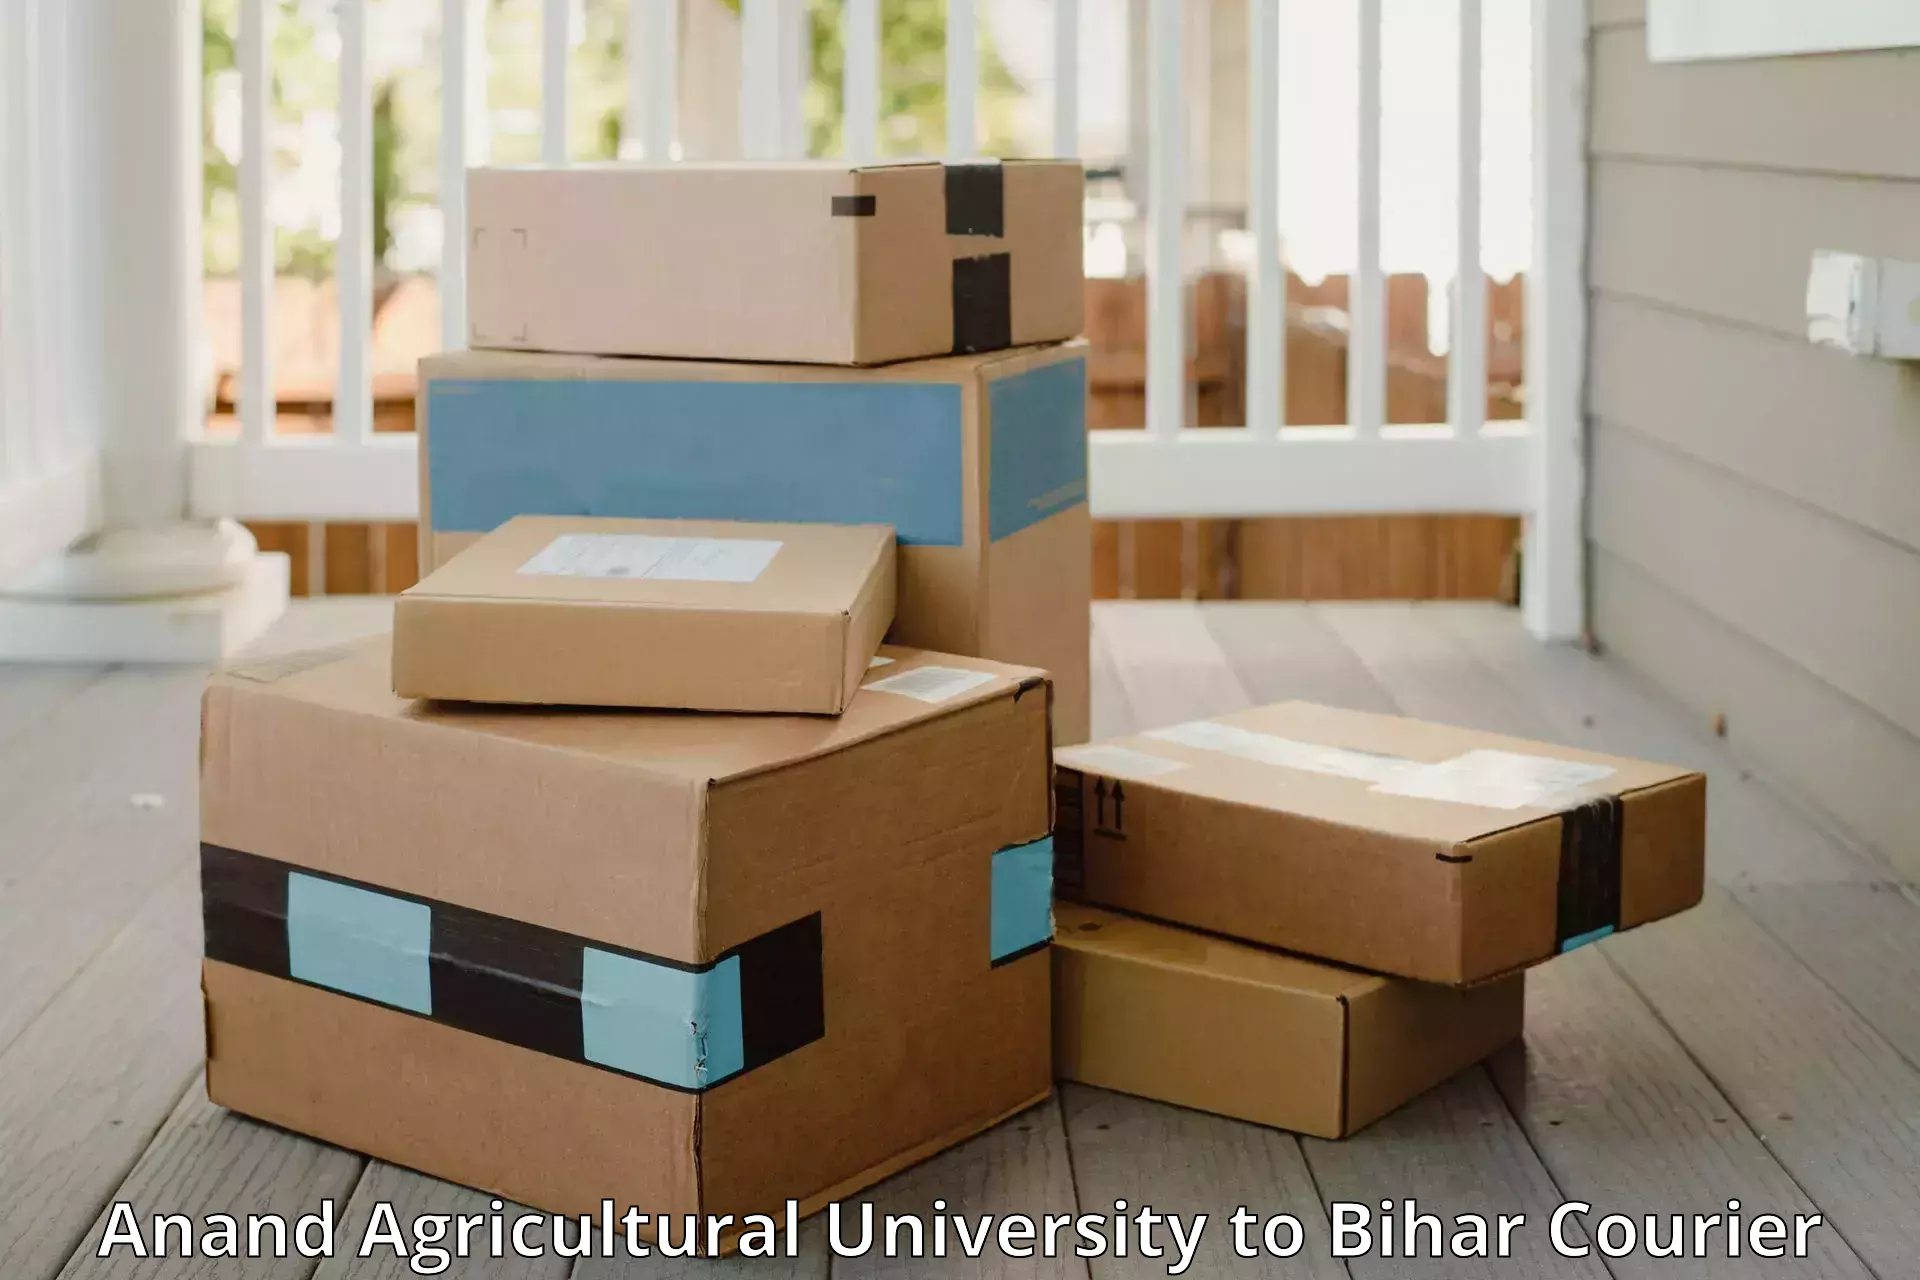 Online luggage shipping Anand Agricultural University to Sandesh